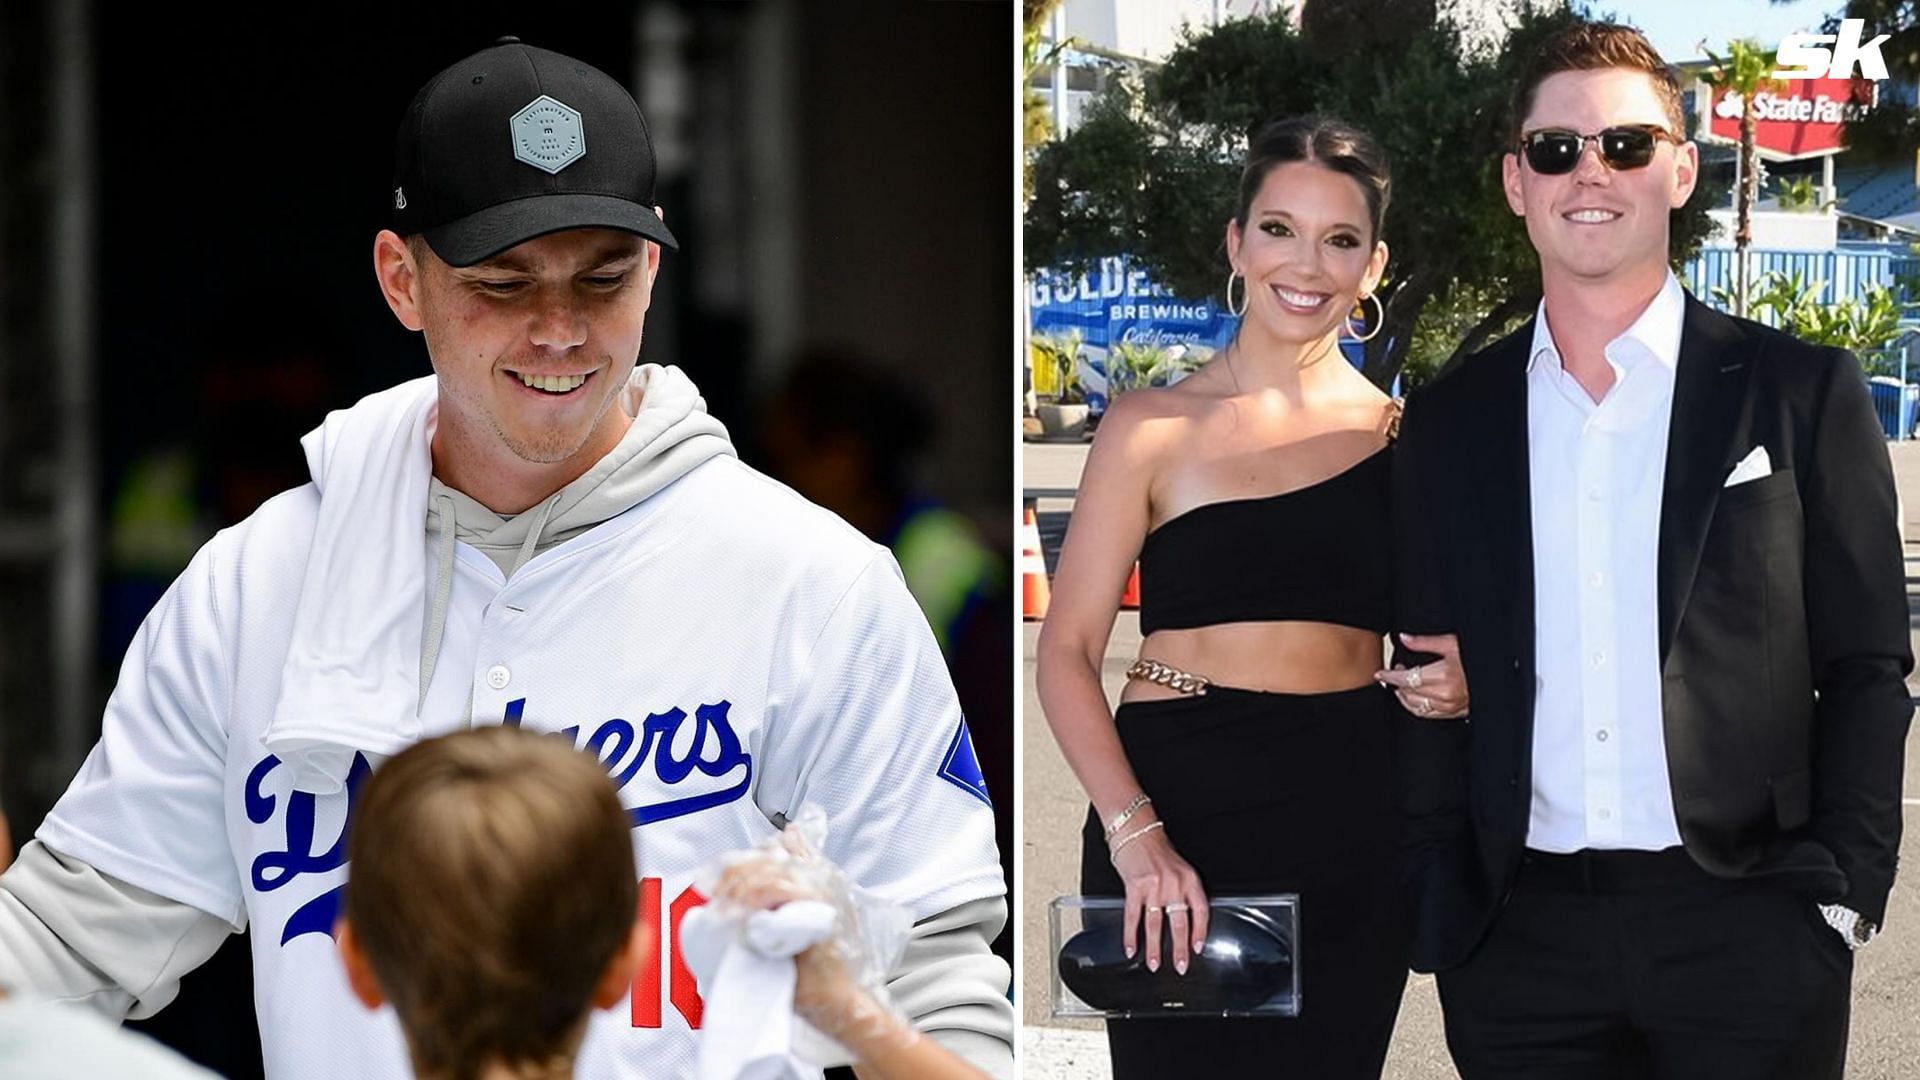 PHOTO: will.smith/INSTAGRAM/ The Smith Couples hosted an event at Dodgers Sradium